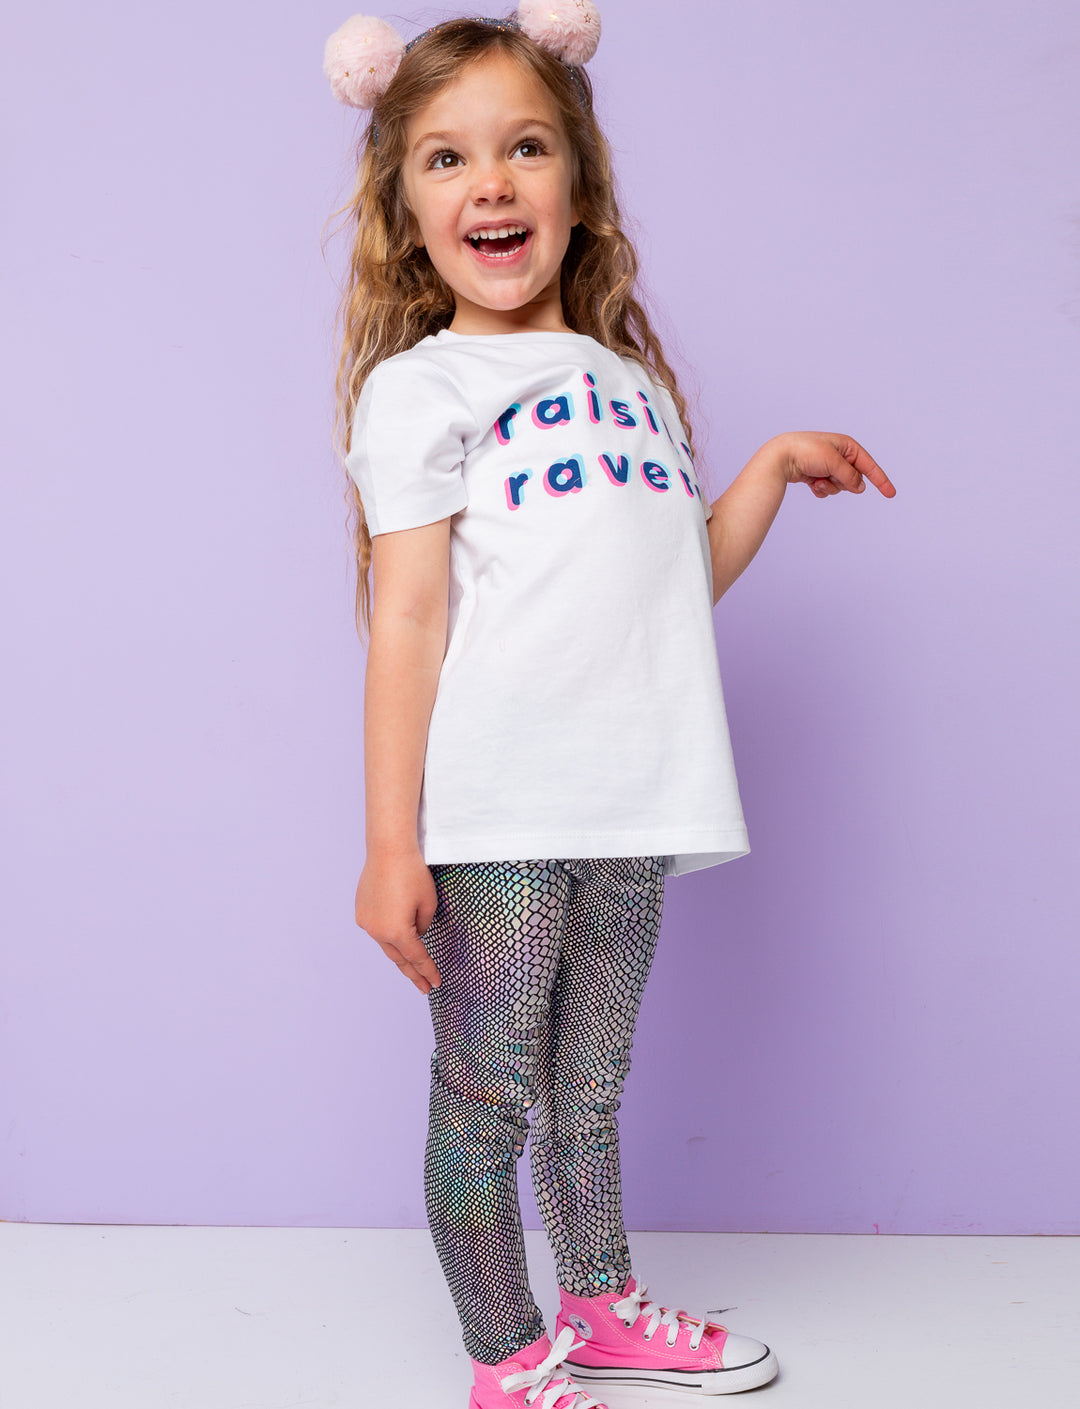 Girl wearing silver holographic snakeskin lycra leggings with a white t-shirt that says 'raising ravers'.